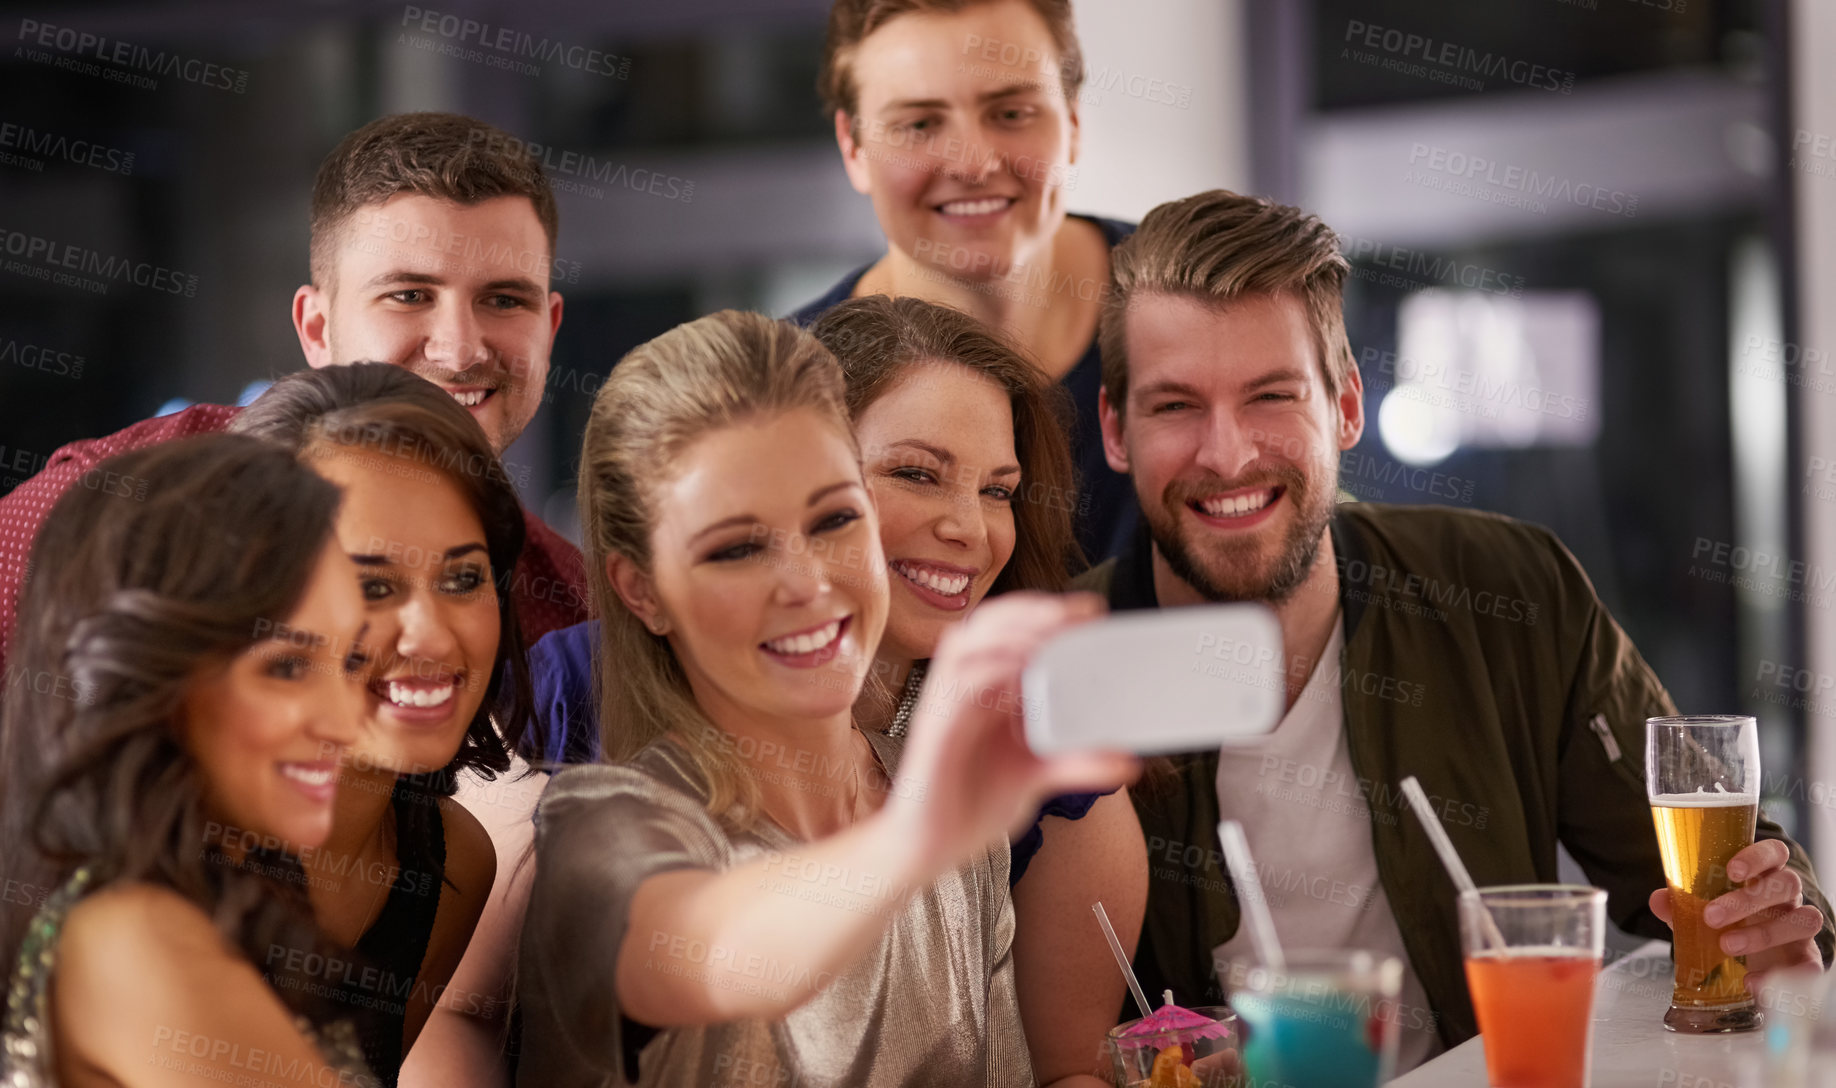 Buy stock photo Shot of a happy group of friends taking a selfie while having drinks at a bar together